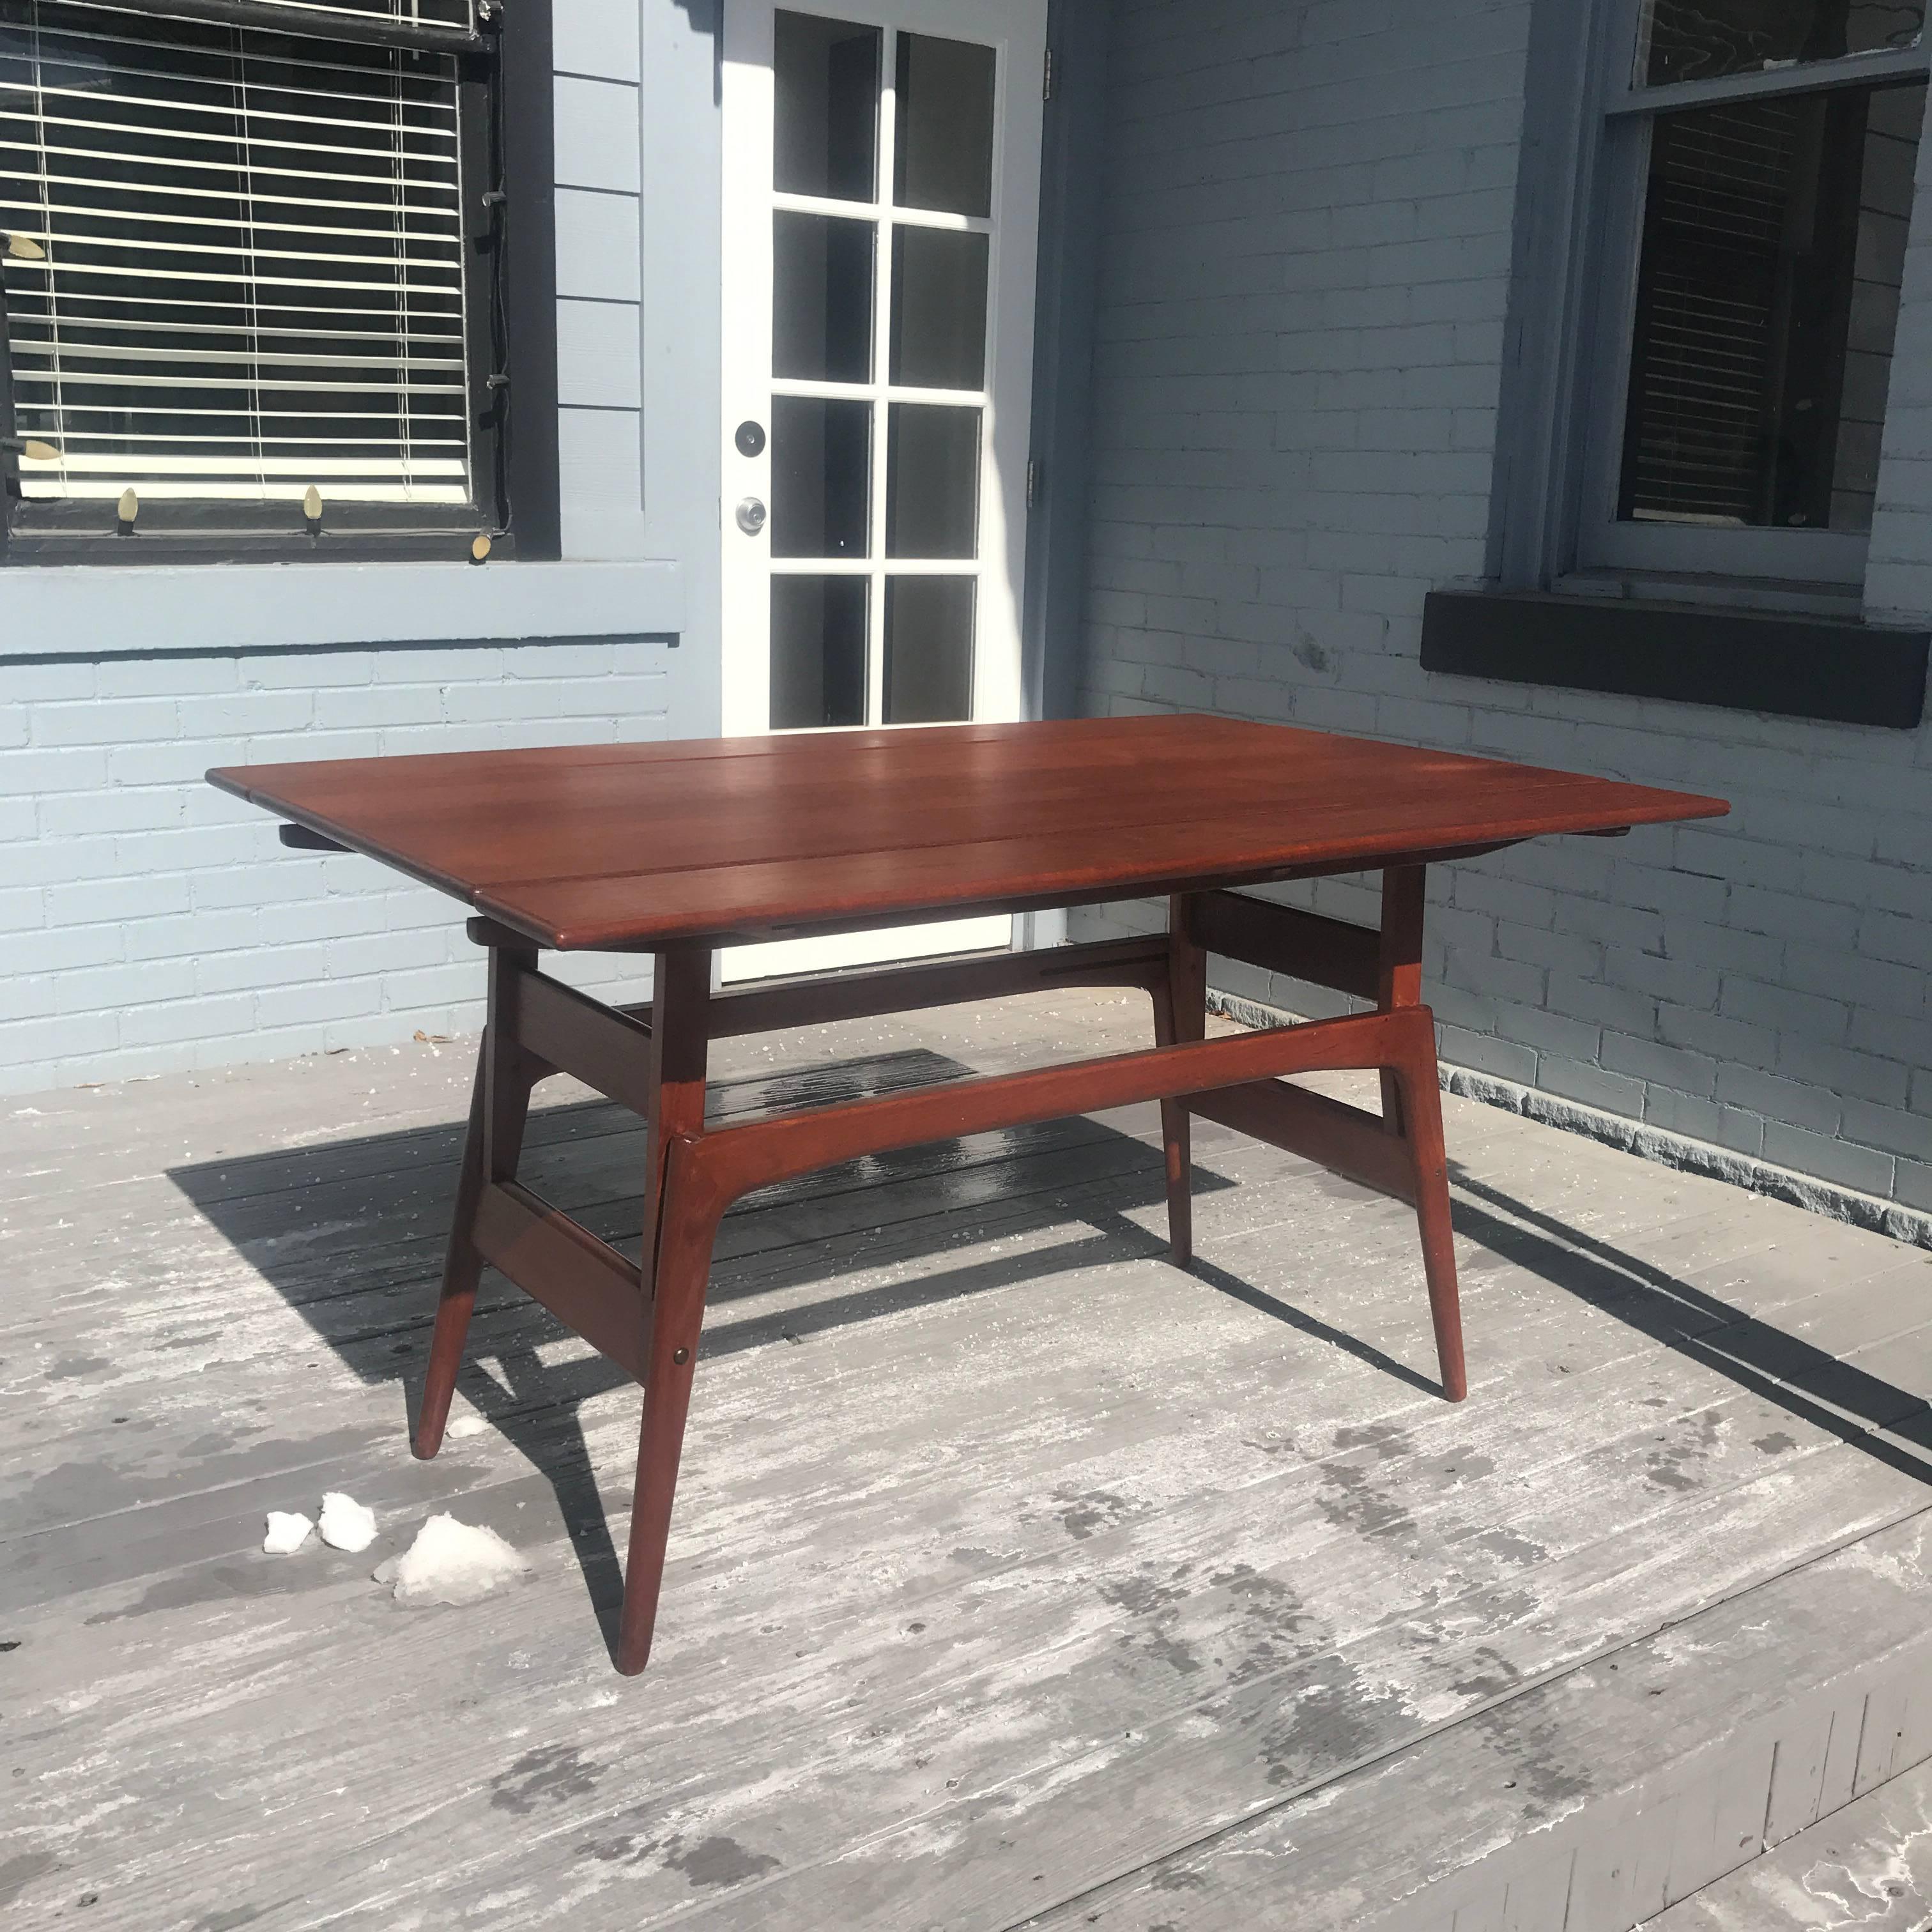 Beautiful table that raises up to create a dining table
great condition
can be used as a sofa table or coffee table and or a dining table when lifted up
amazing design.